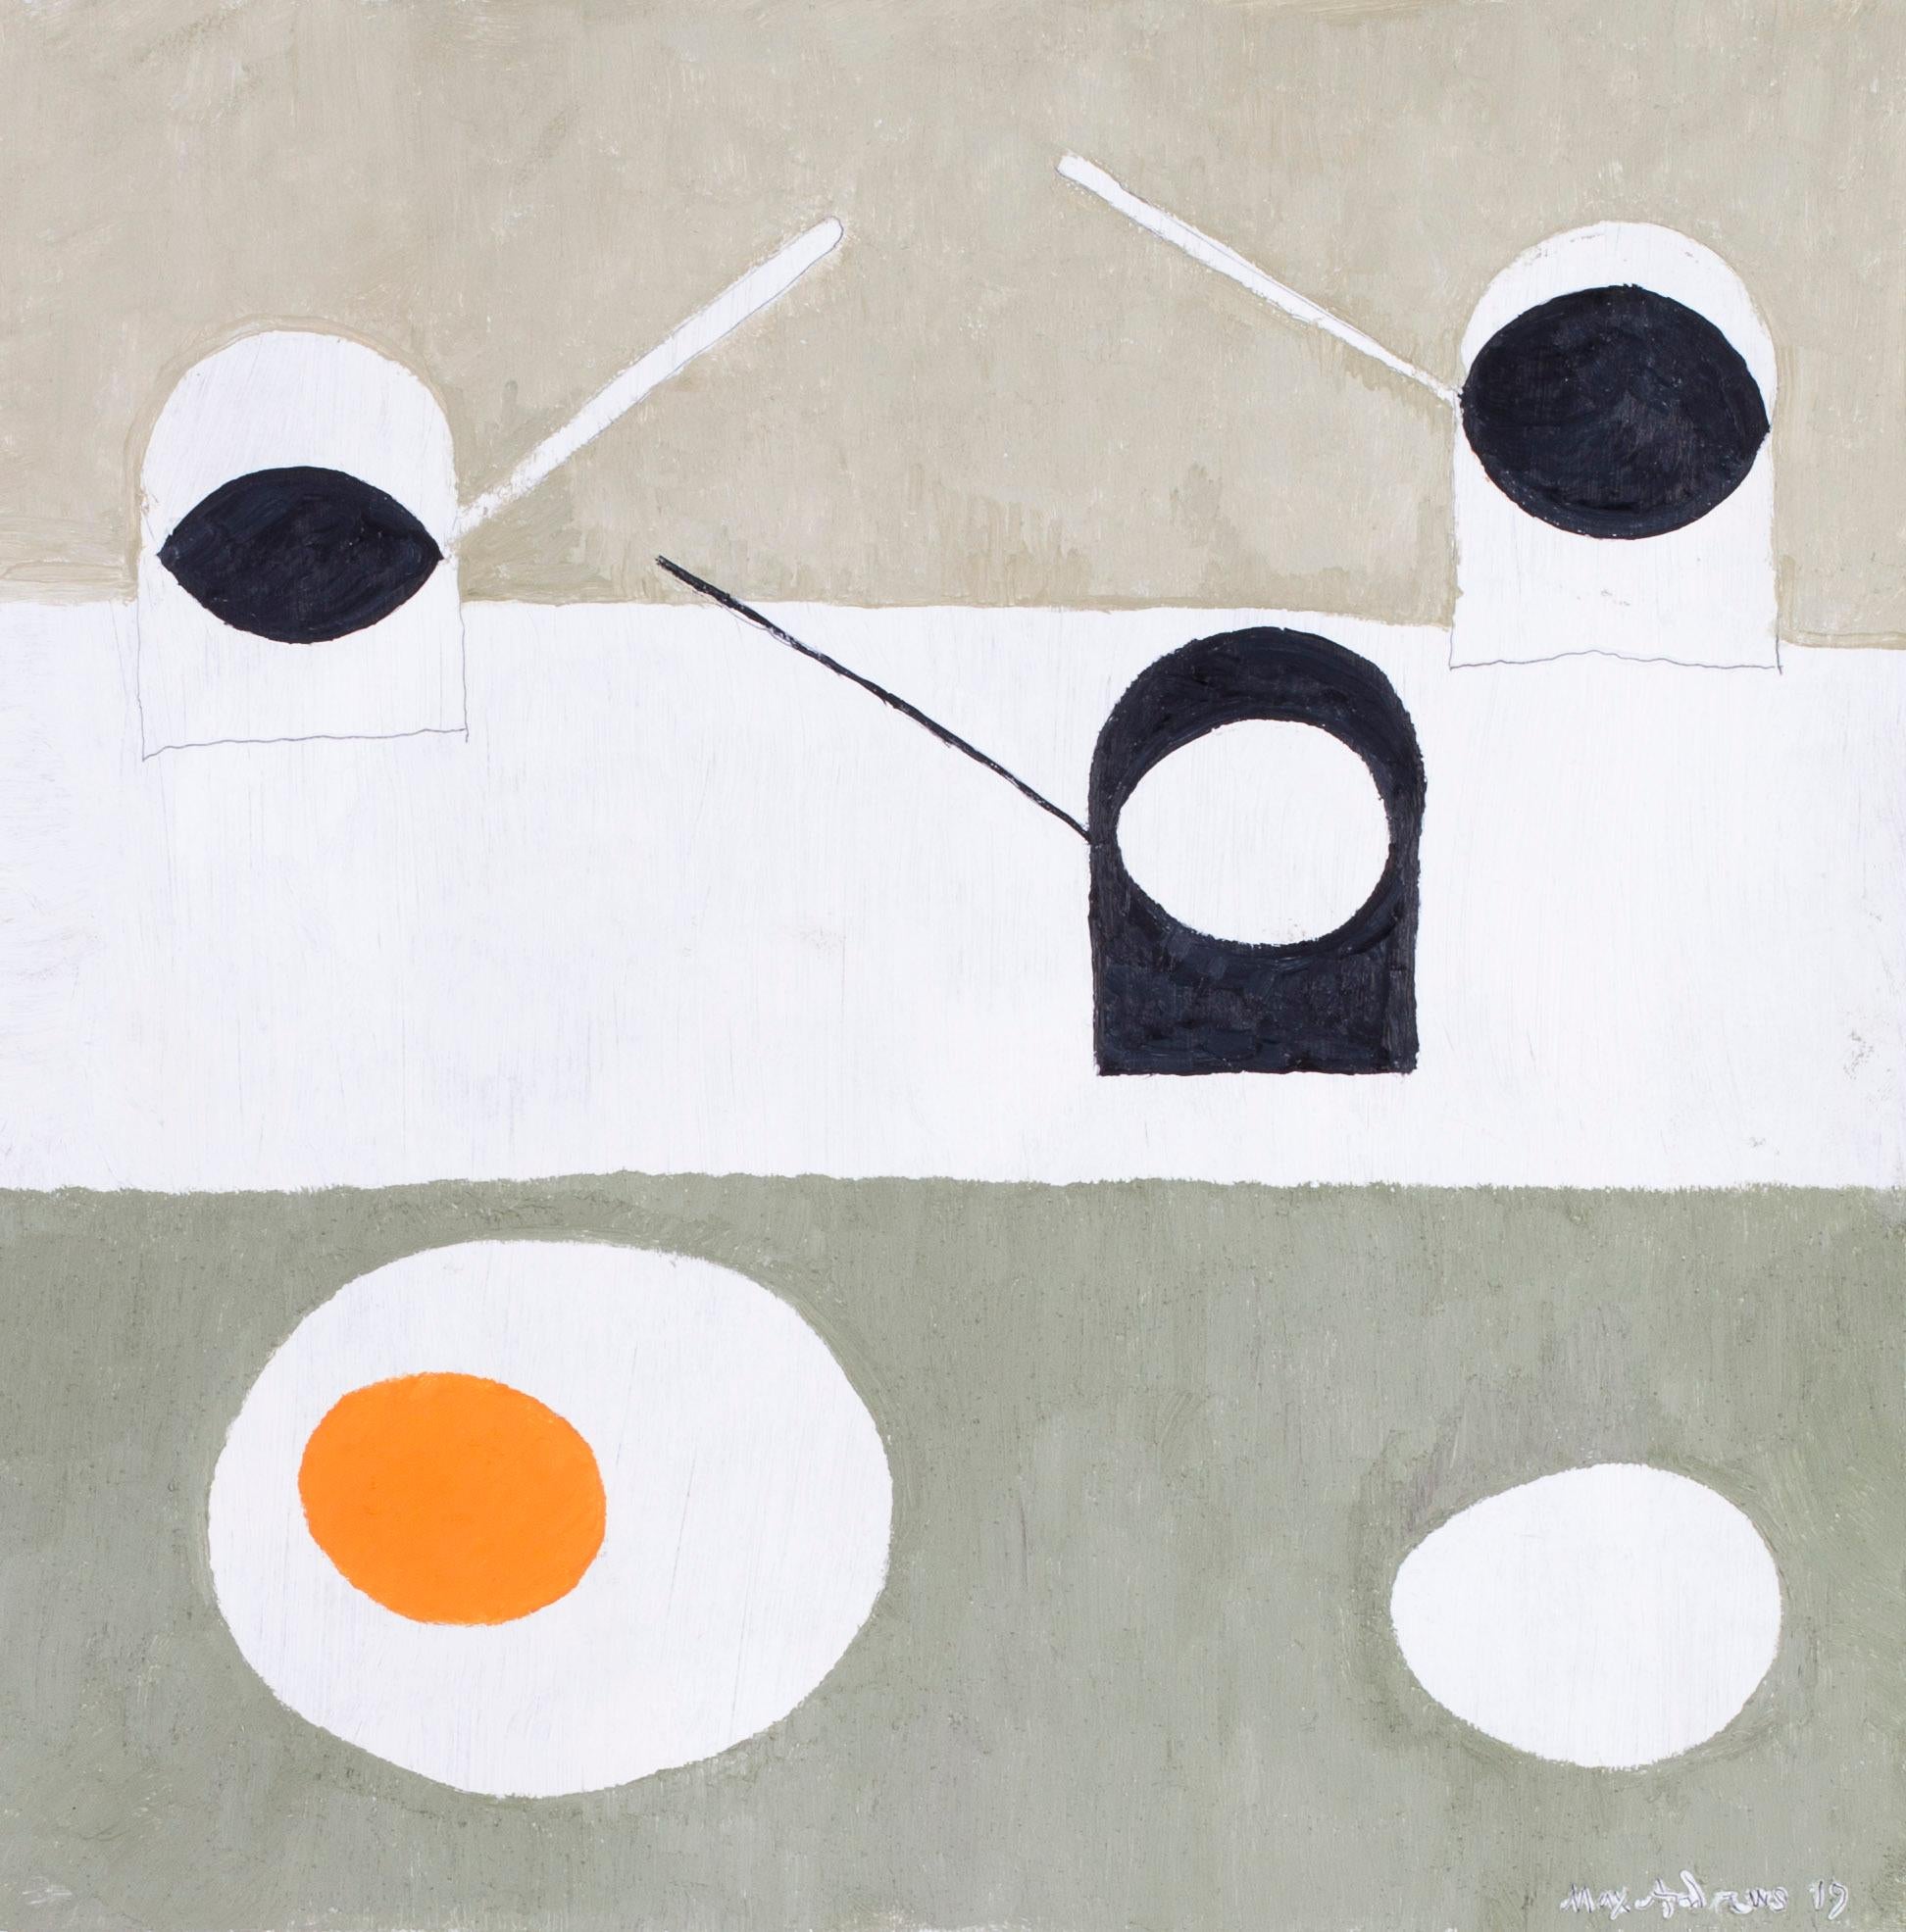 British, 21st Century abstract still life 'Eggs on pans II' - Painting by Max Andrews